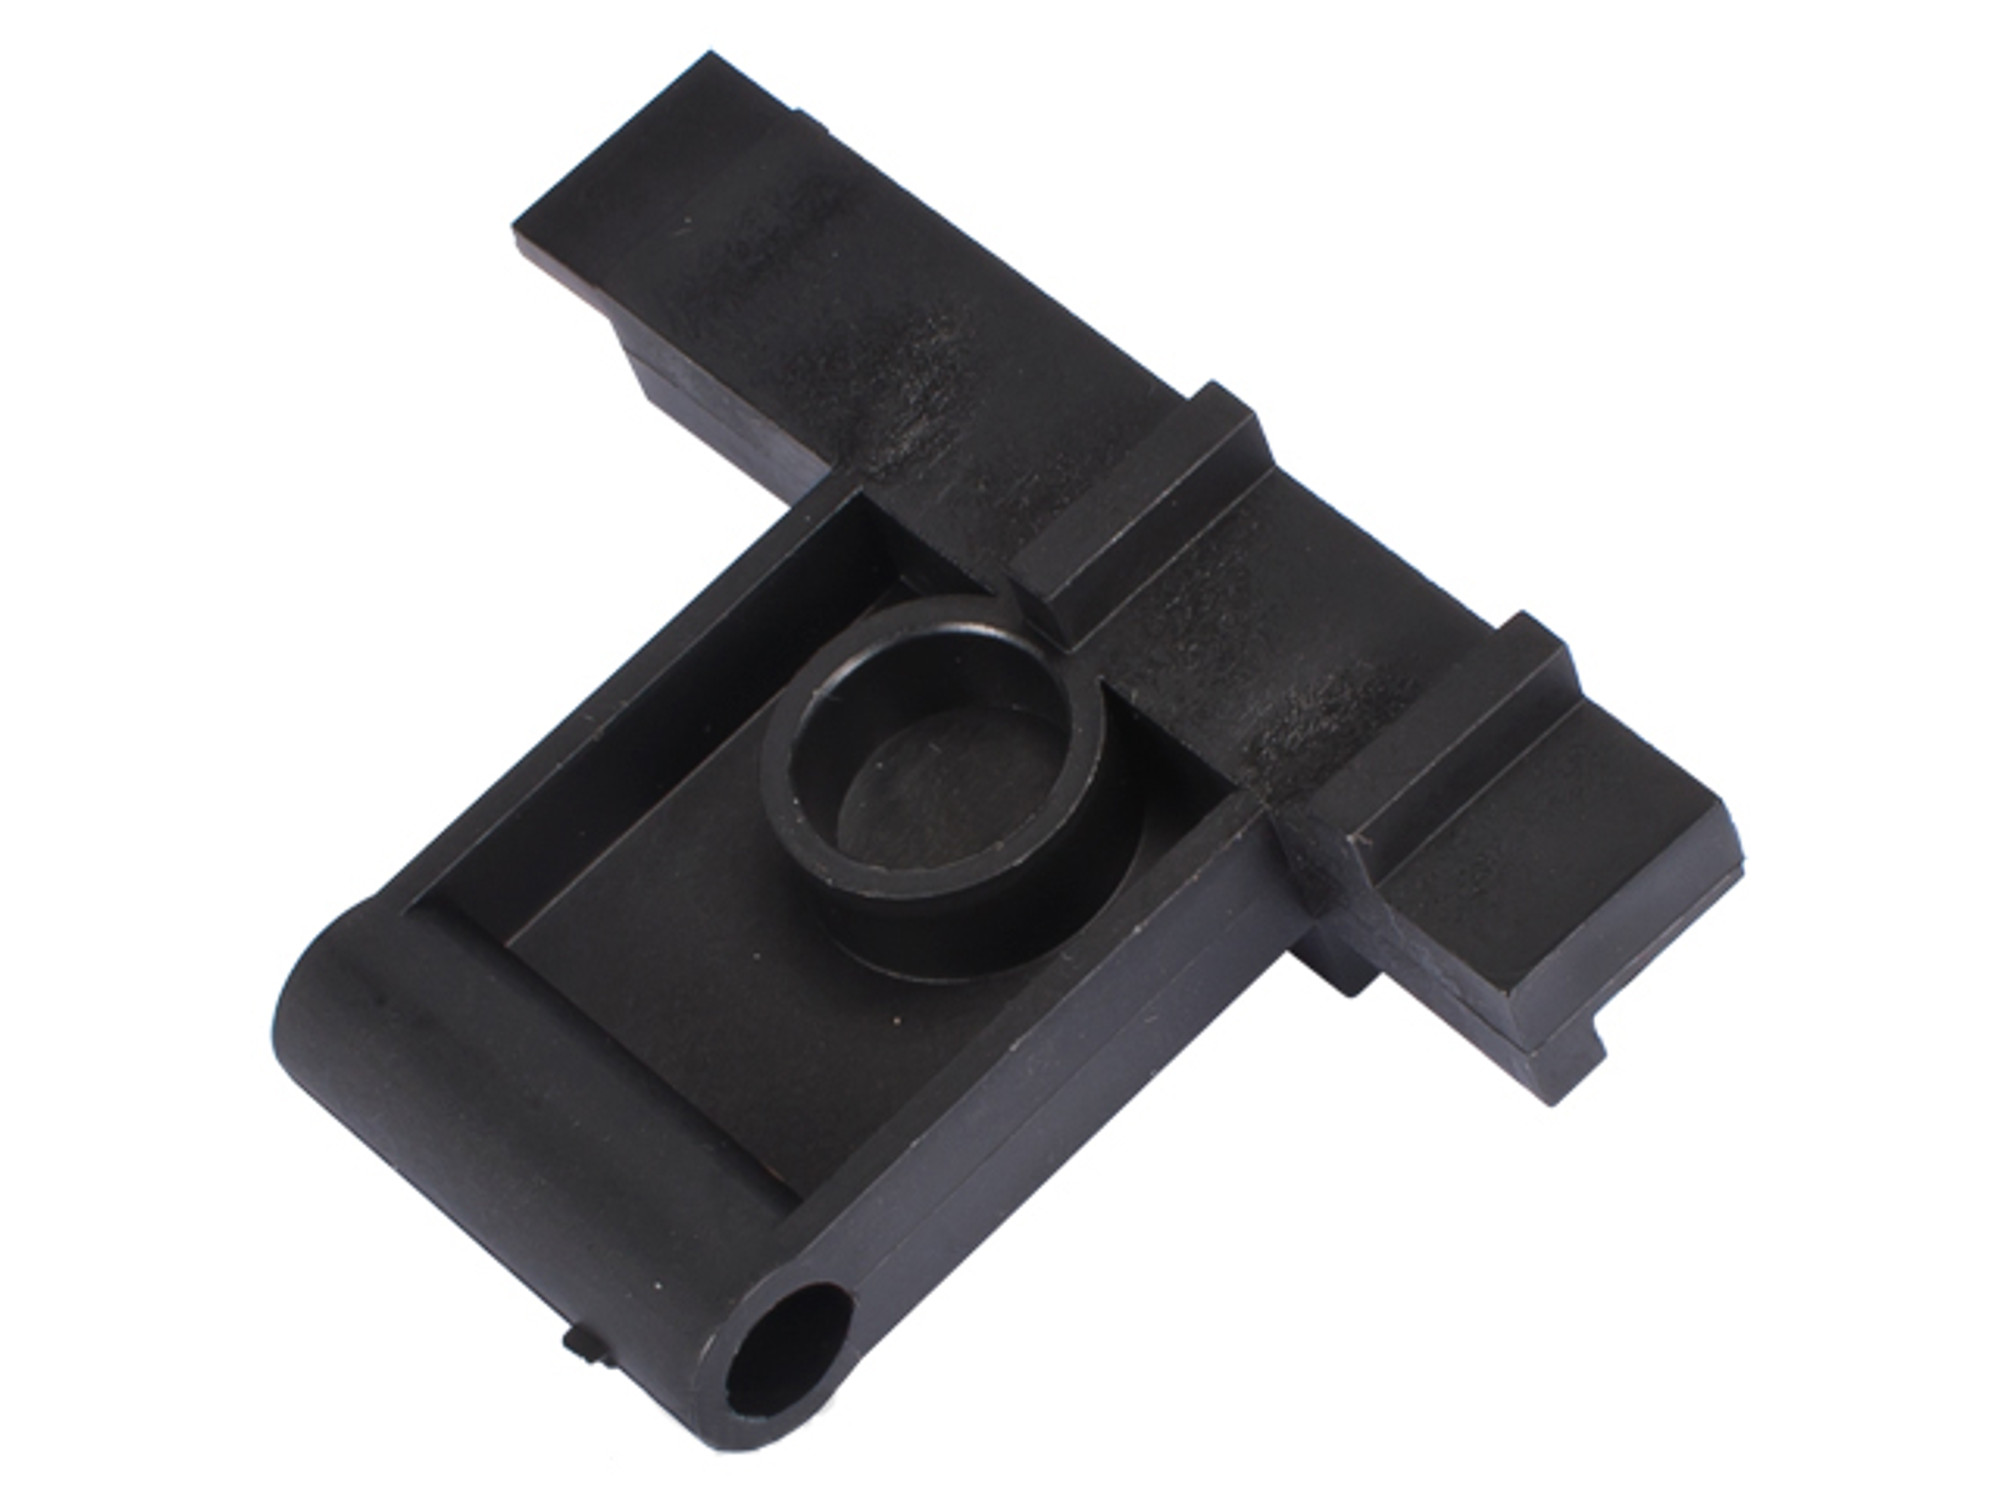 WE-Tech Replacement Adjustable Stock Positioning Piece for SCAR Airsoft GBB Rifles - Part #81